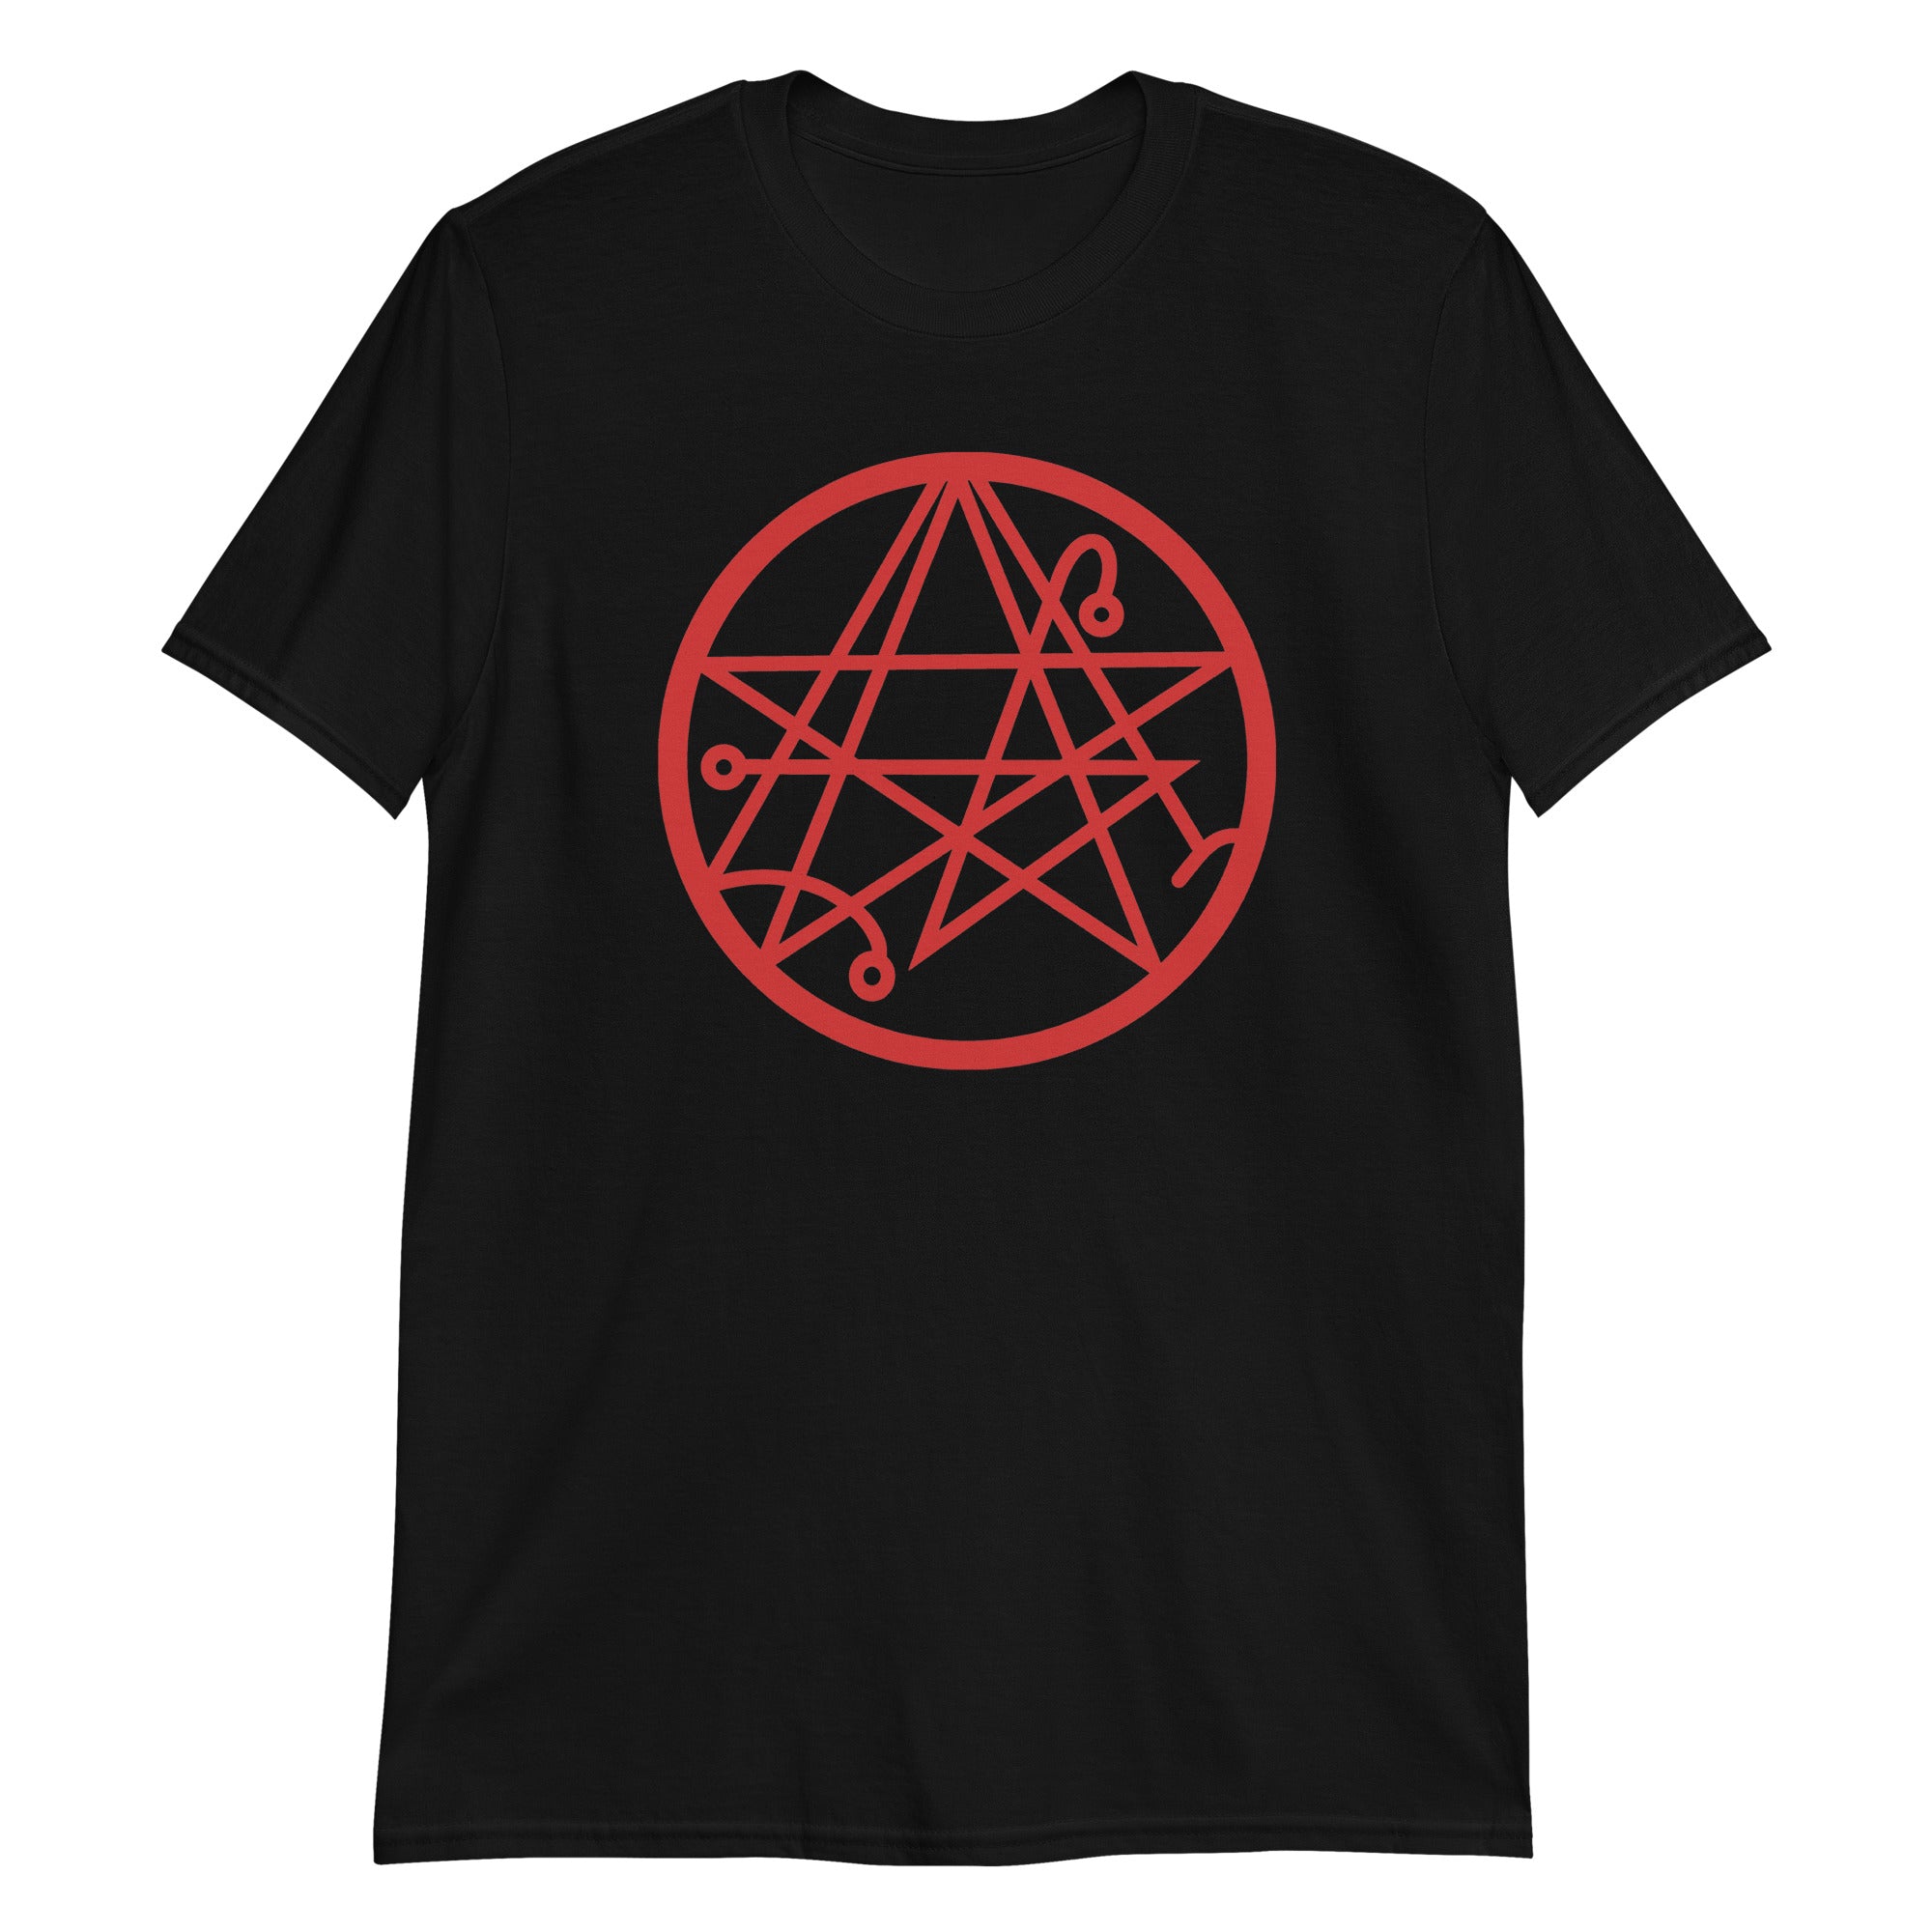 Necronomicon The Book of the Dead Occult Symbol Men's Short Sleeve T-Shirt - Edge of Life Designs